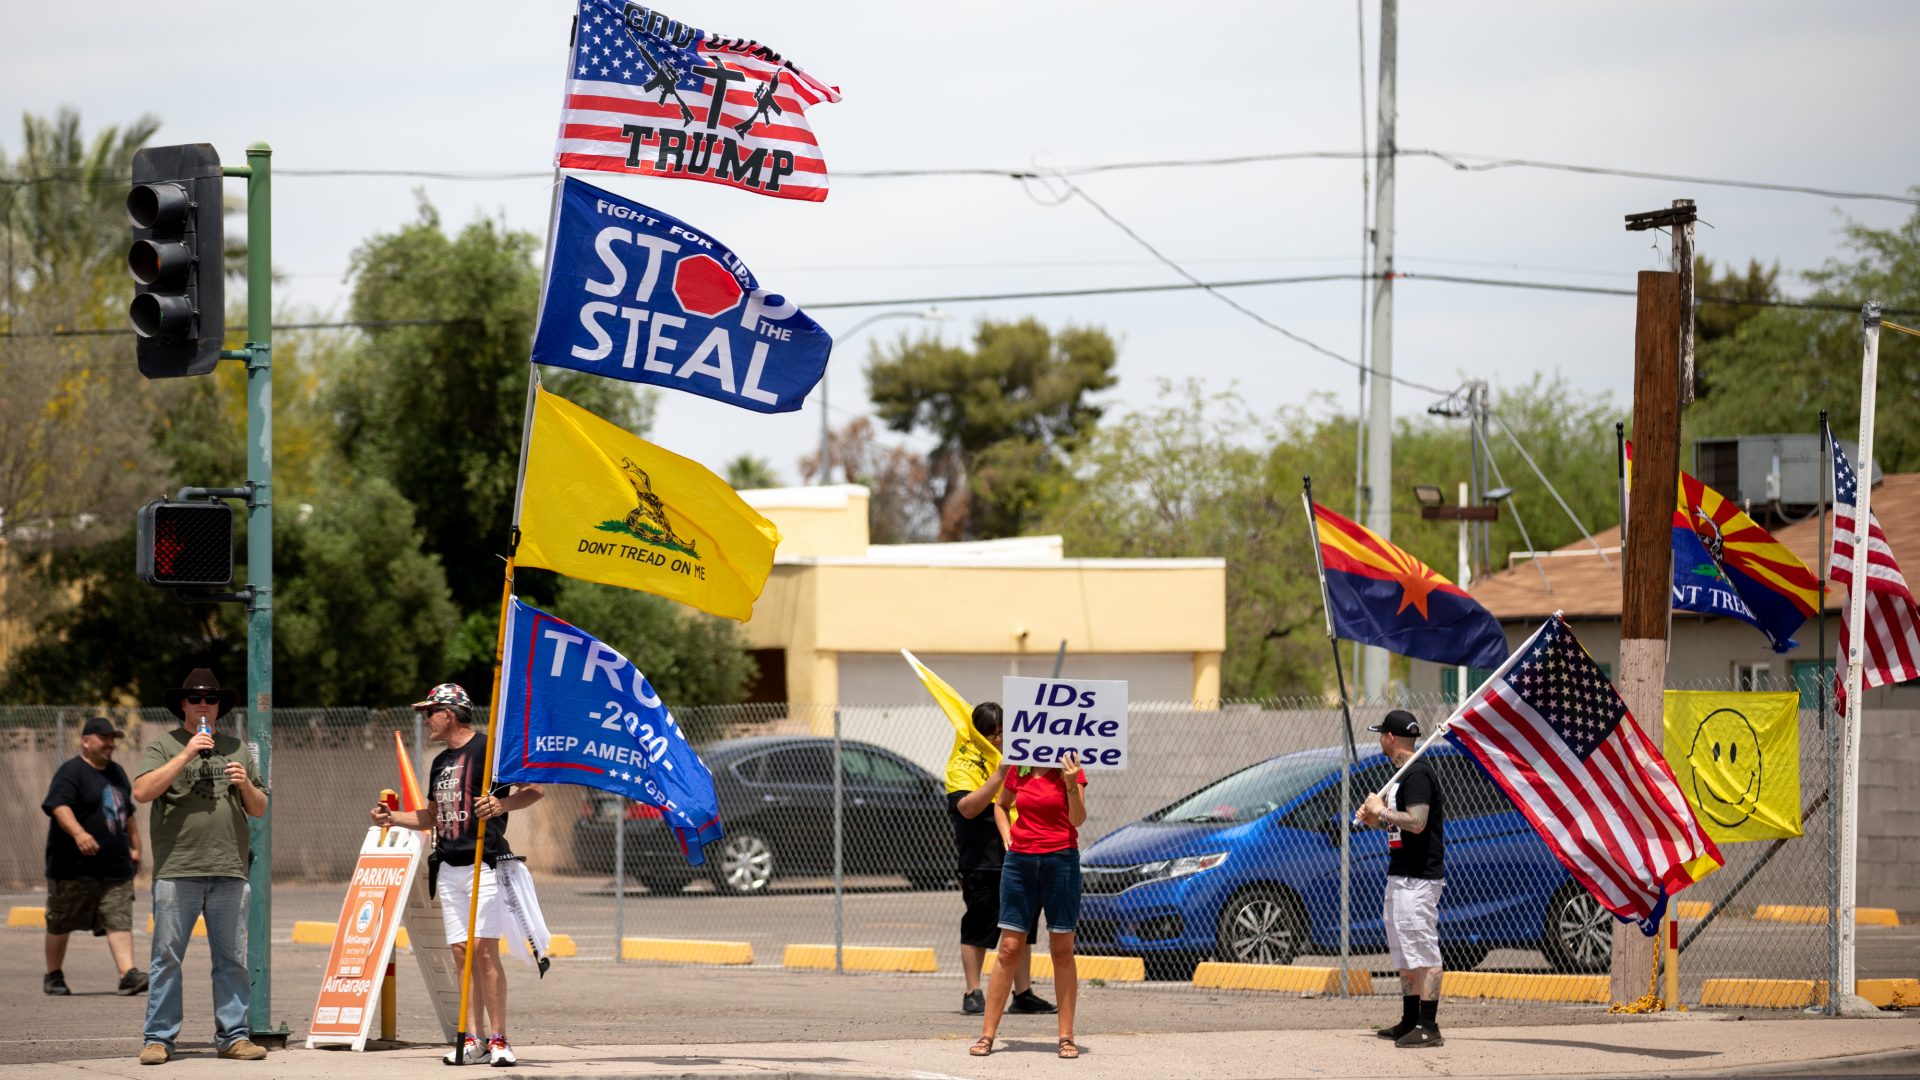 Demonstrators in support of former President Donald Trump gather on May 1 outside the Arizona Veterans Memorial Coliseum in Phoenix, where a controversial 2020 general election review was set to begin. Trump has heartily supported the audit.